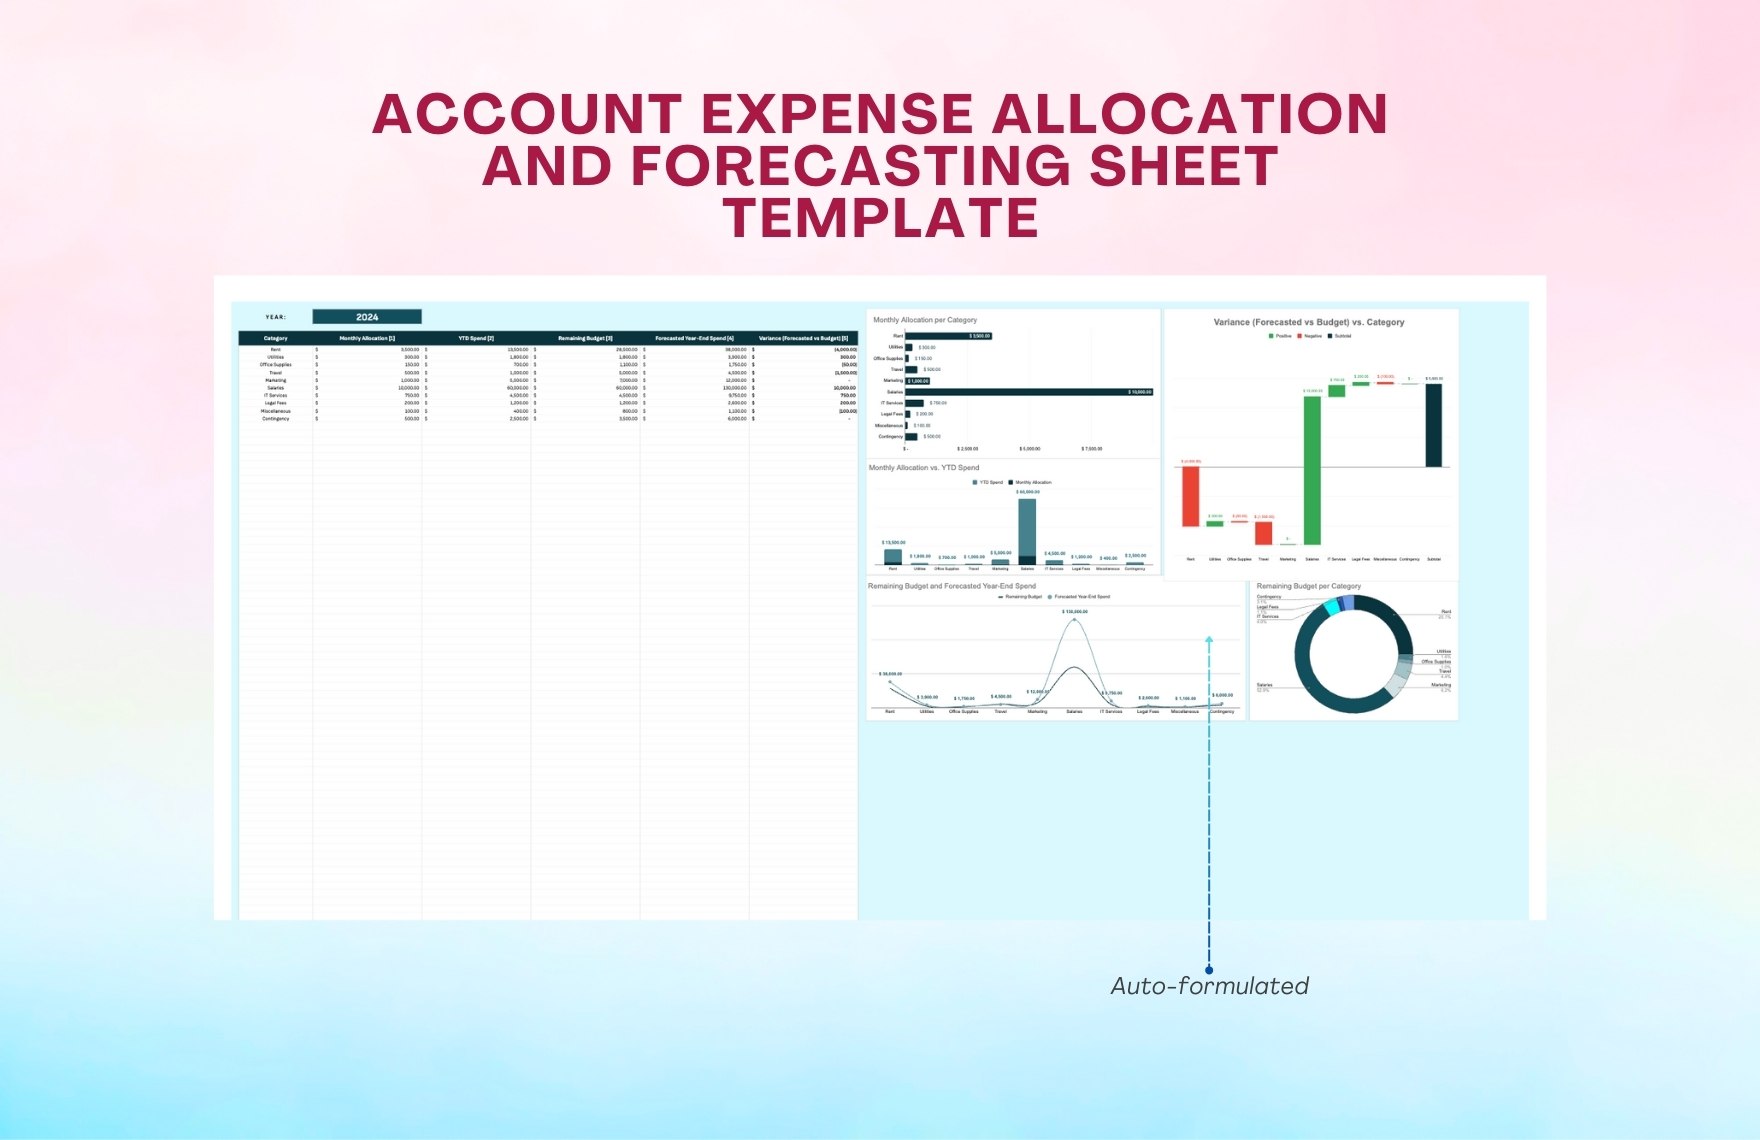 Account Expense Allocation and Forecasting Sheet Template